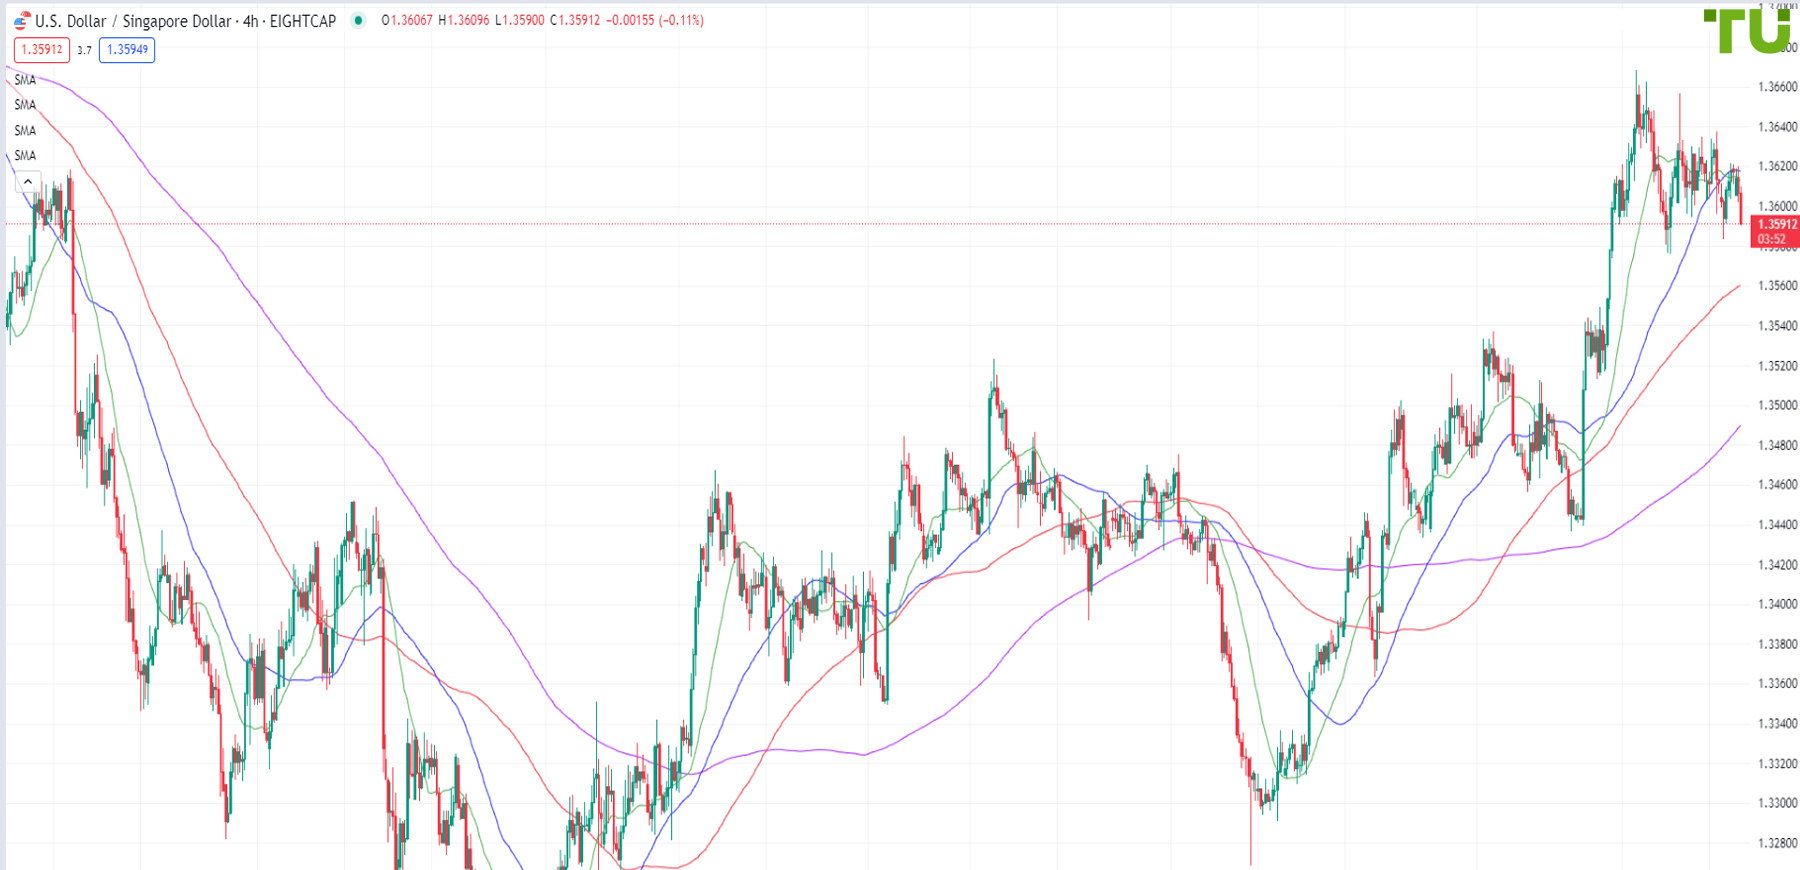 USD/SGD again tests support at 1.3590